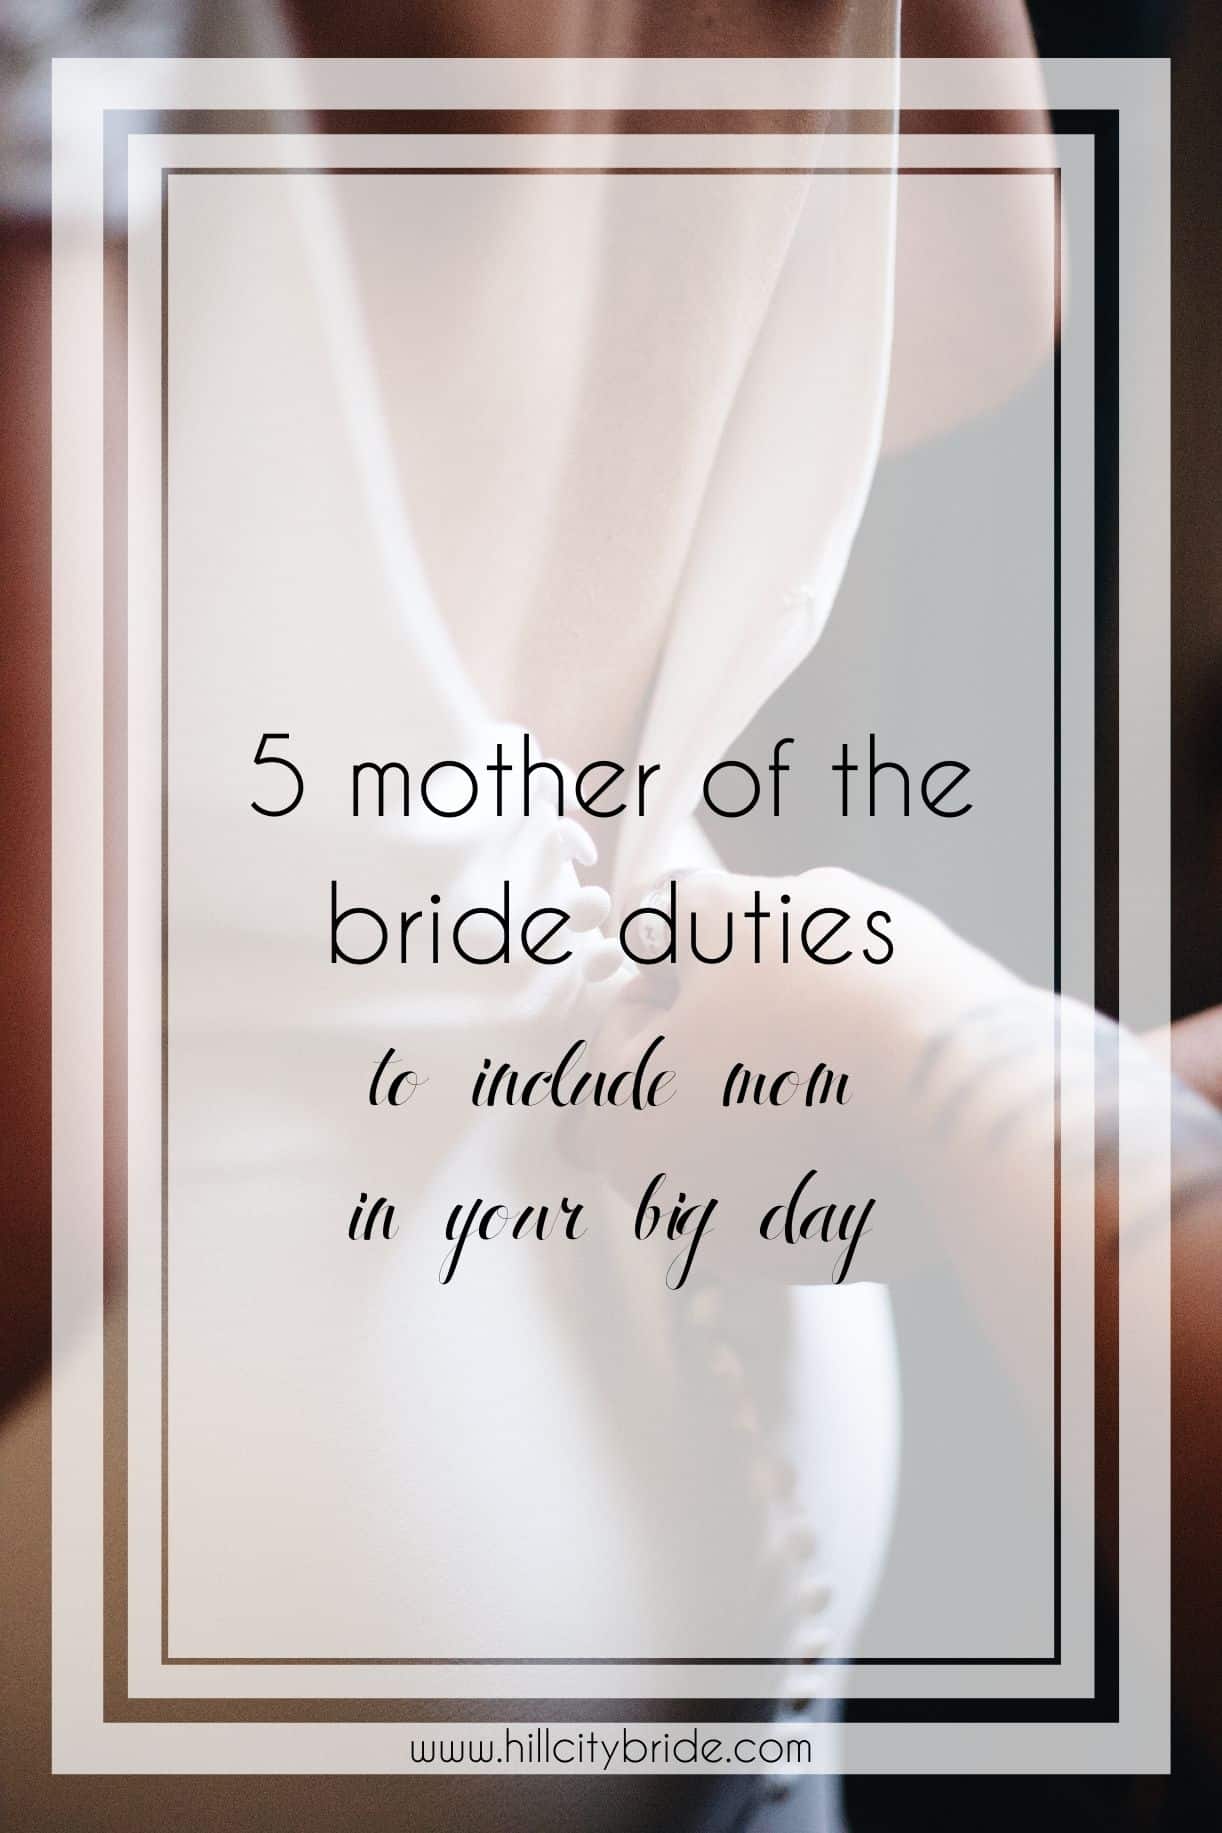 5 Unique Mother of the Bride Duties to Incorporate on Your Big Day